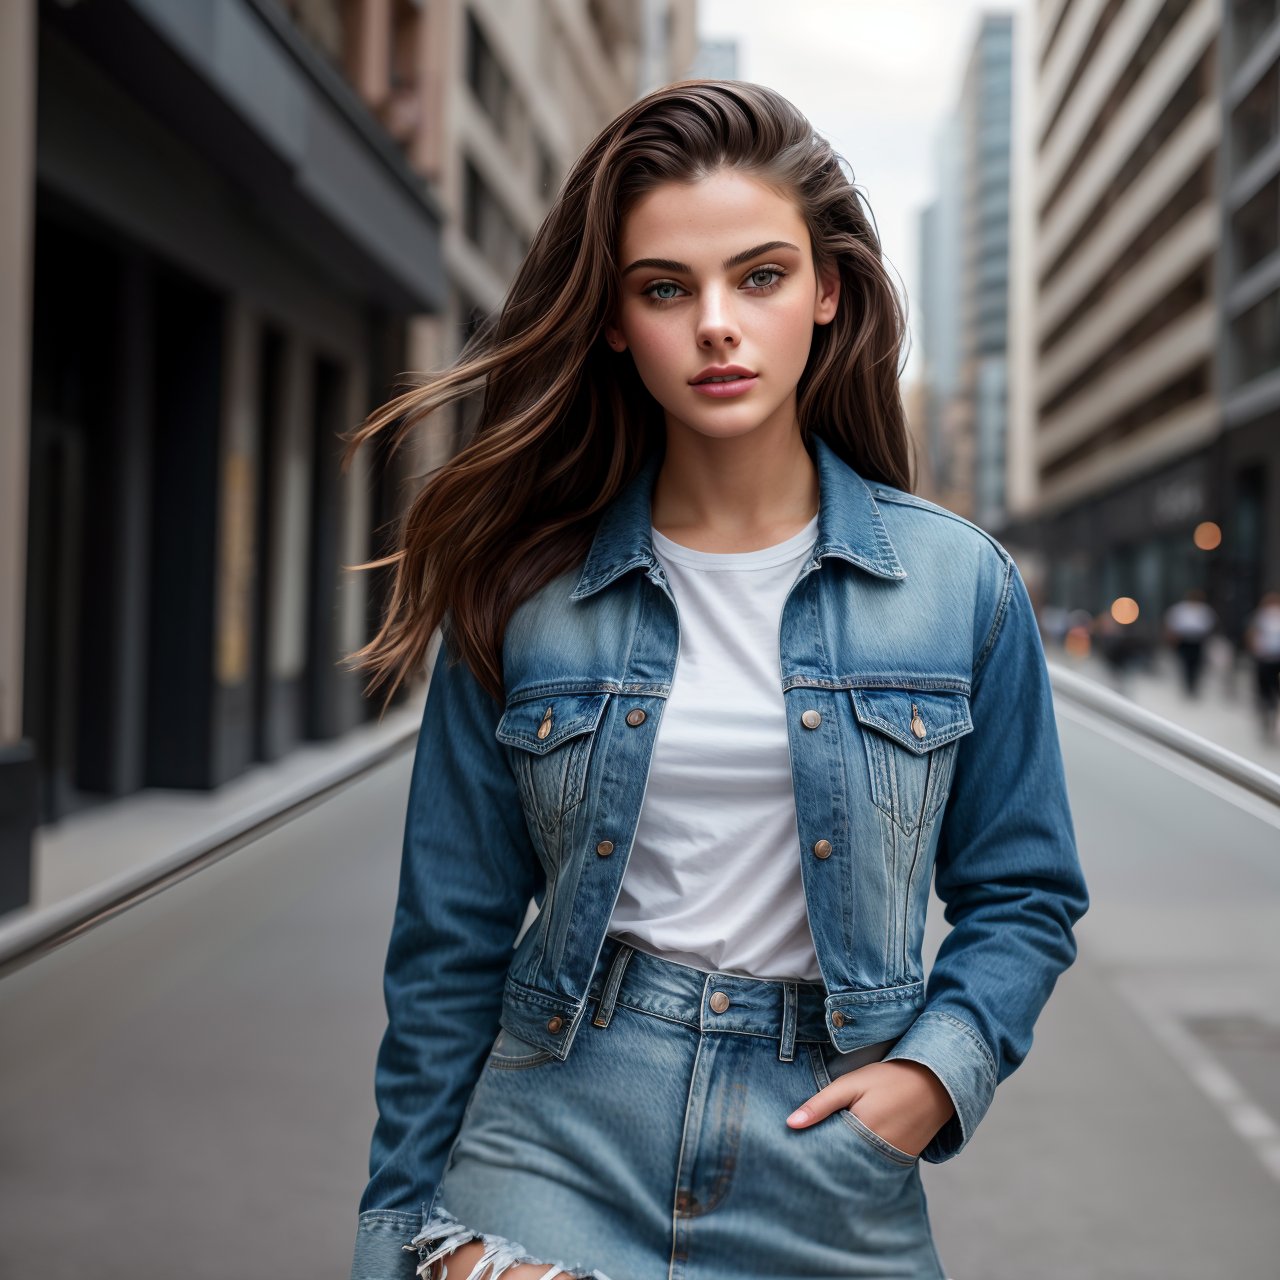 (masterpiece:1.3), best quality, extra resolution, looking at viewer, portrait of stunning (AIDA_LoRA_MeW2016:1.06) <lora:AIDA_LoRA_MeW2016:0.88> wearing a denim jacket and denim skirt posing on the street, little girl, pretty face, flirting, cinematic, dramatic, insane level of details, studio photo, studio photo, kkw-ph1, hdr, f1.7, getty images, (colorful:1.1)